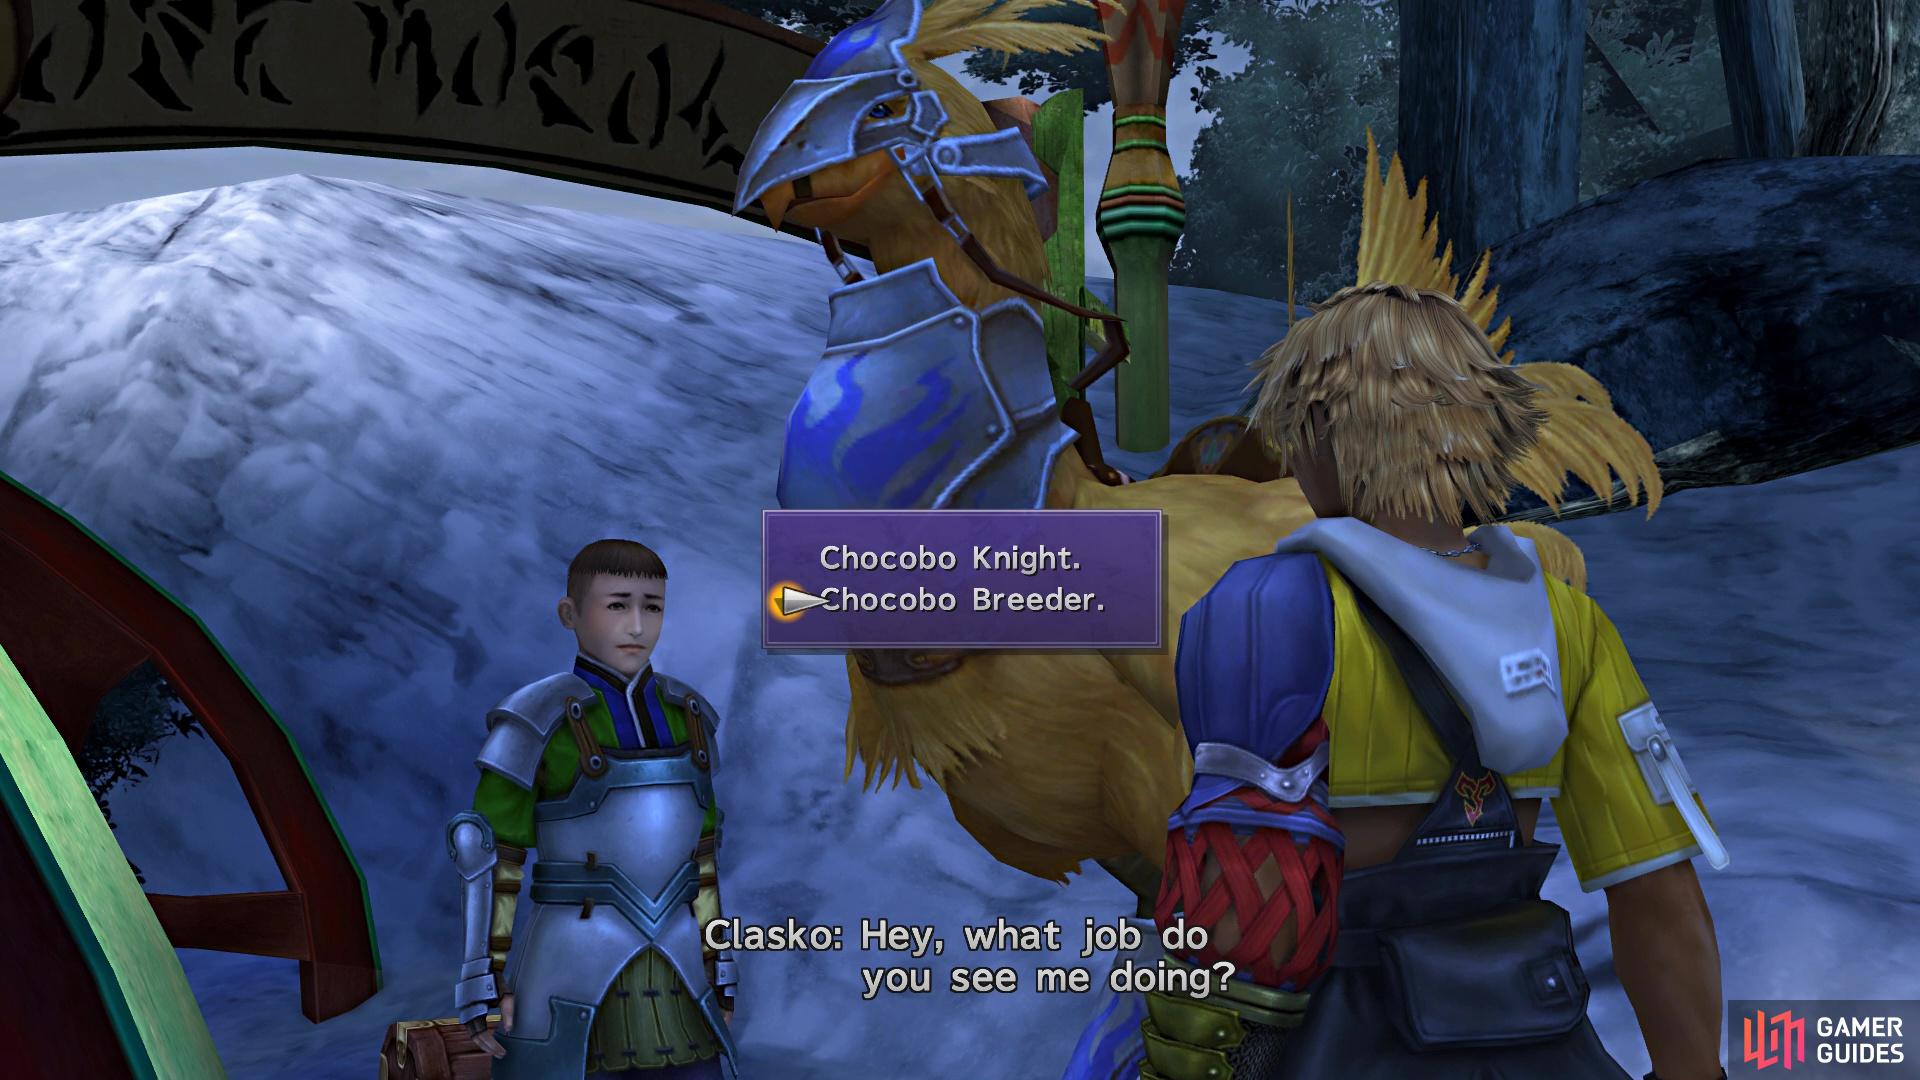 Tell Clasko to become a Chocobo Breeder to see him later in the game